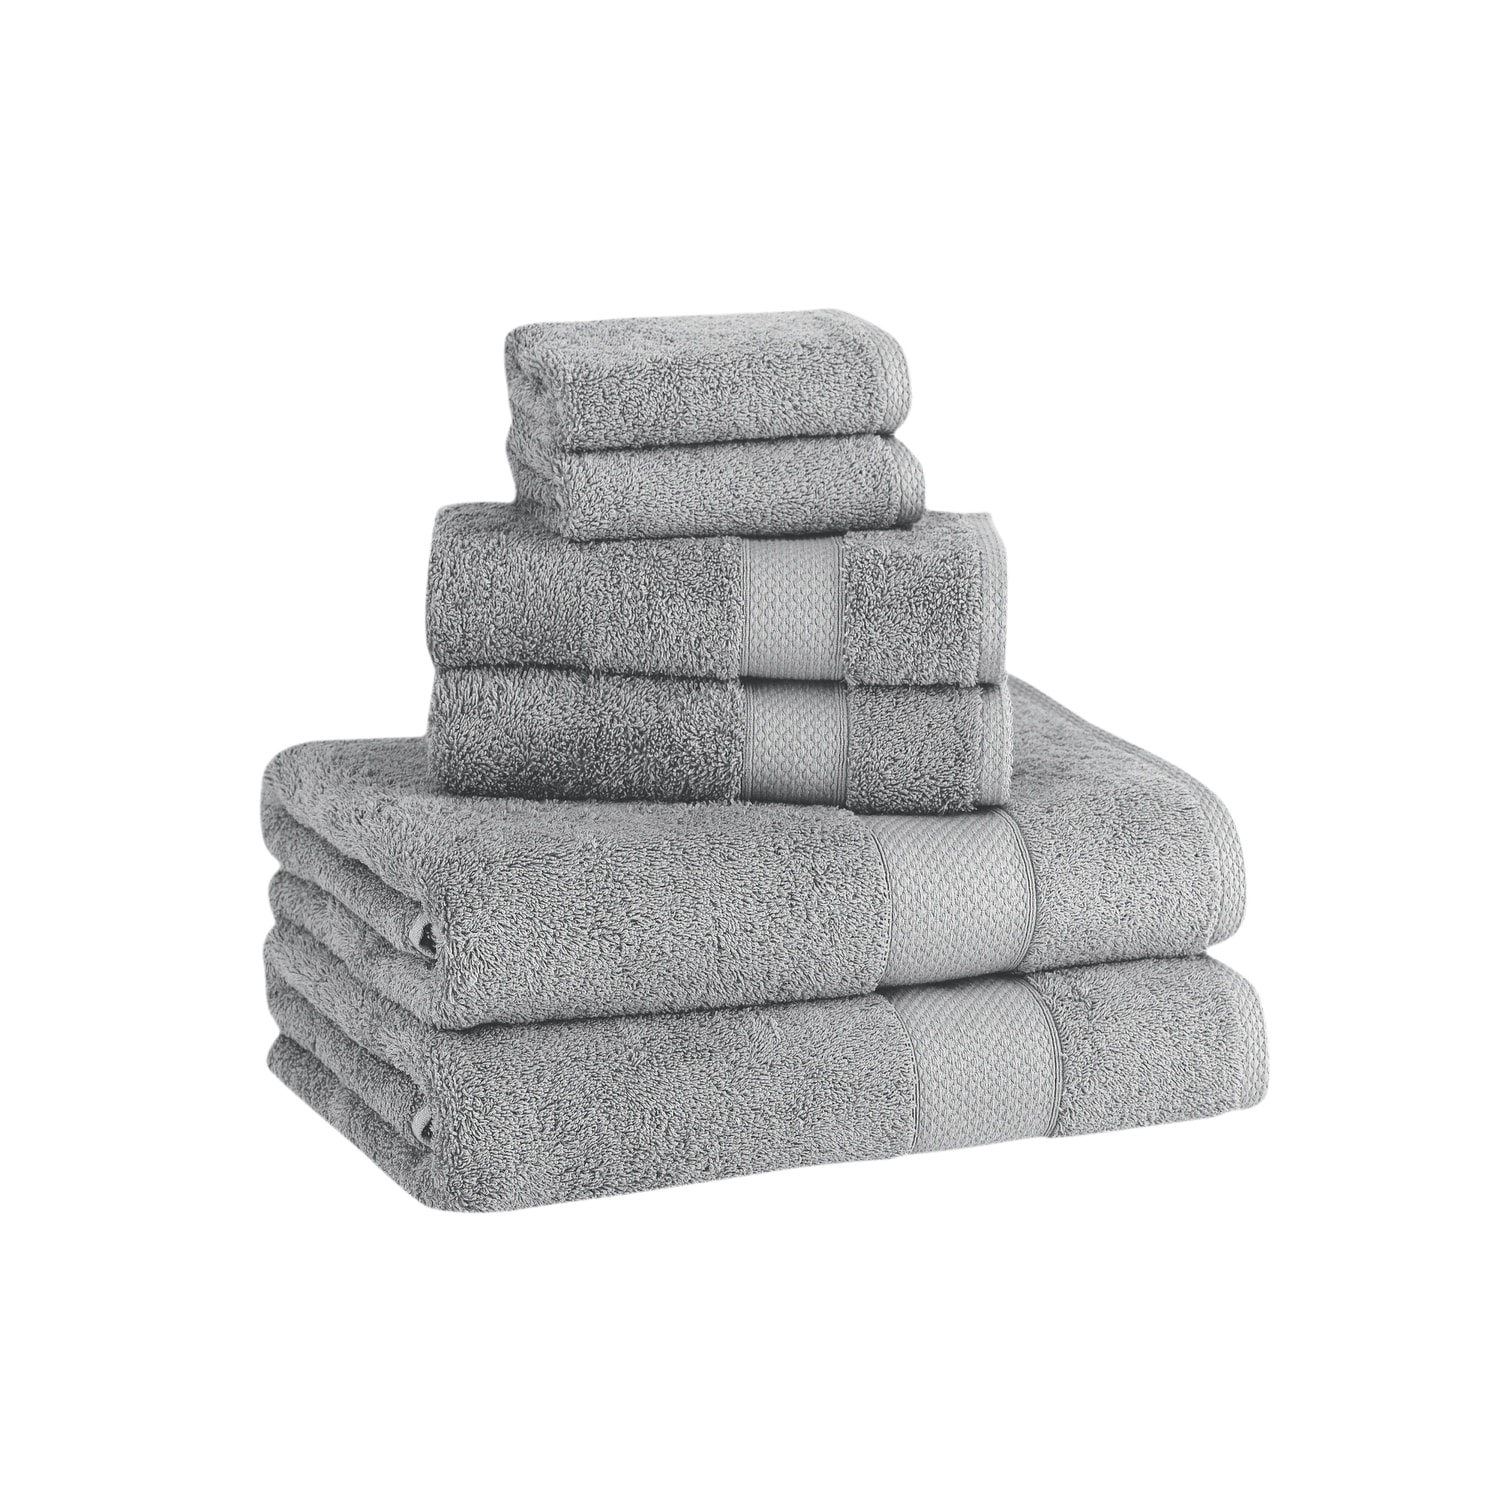 Classic Turkish Towels Luxury Bath Towel Set - Soft and Thick